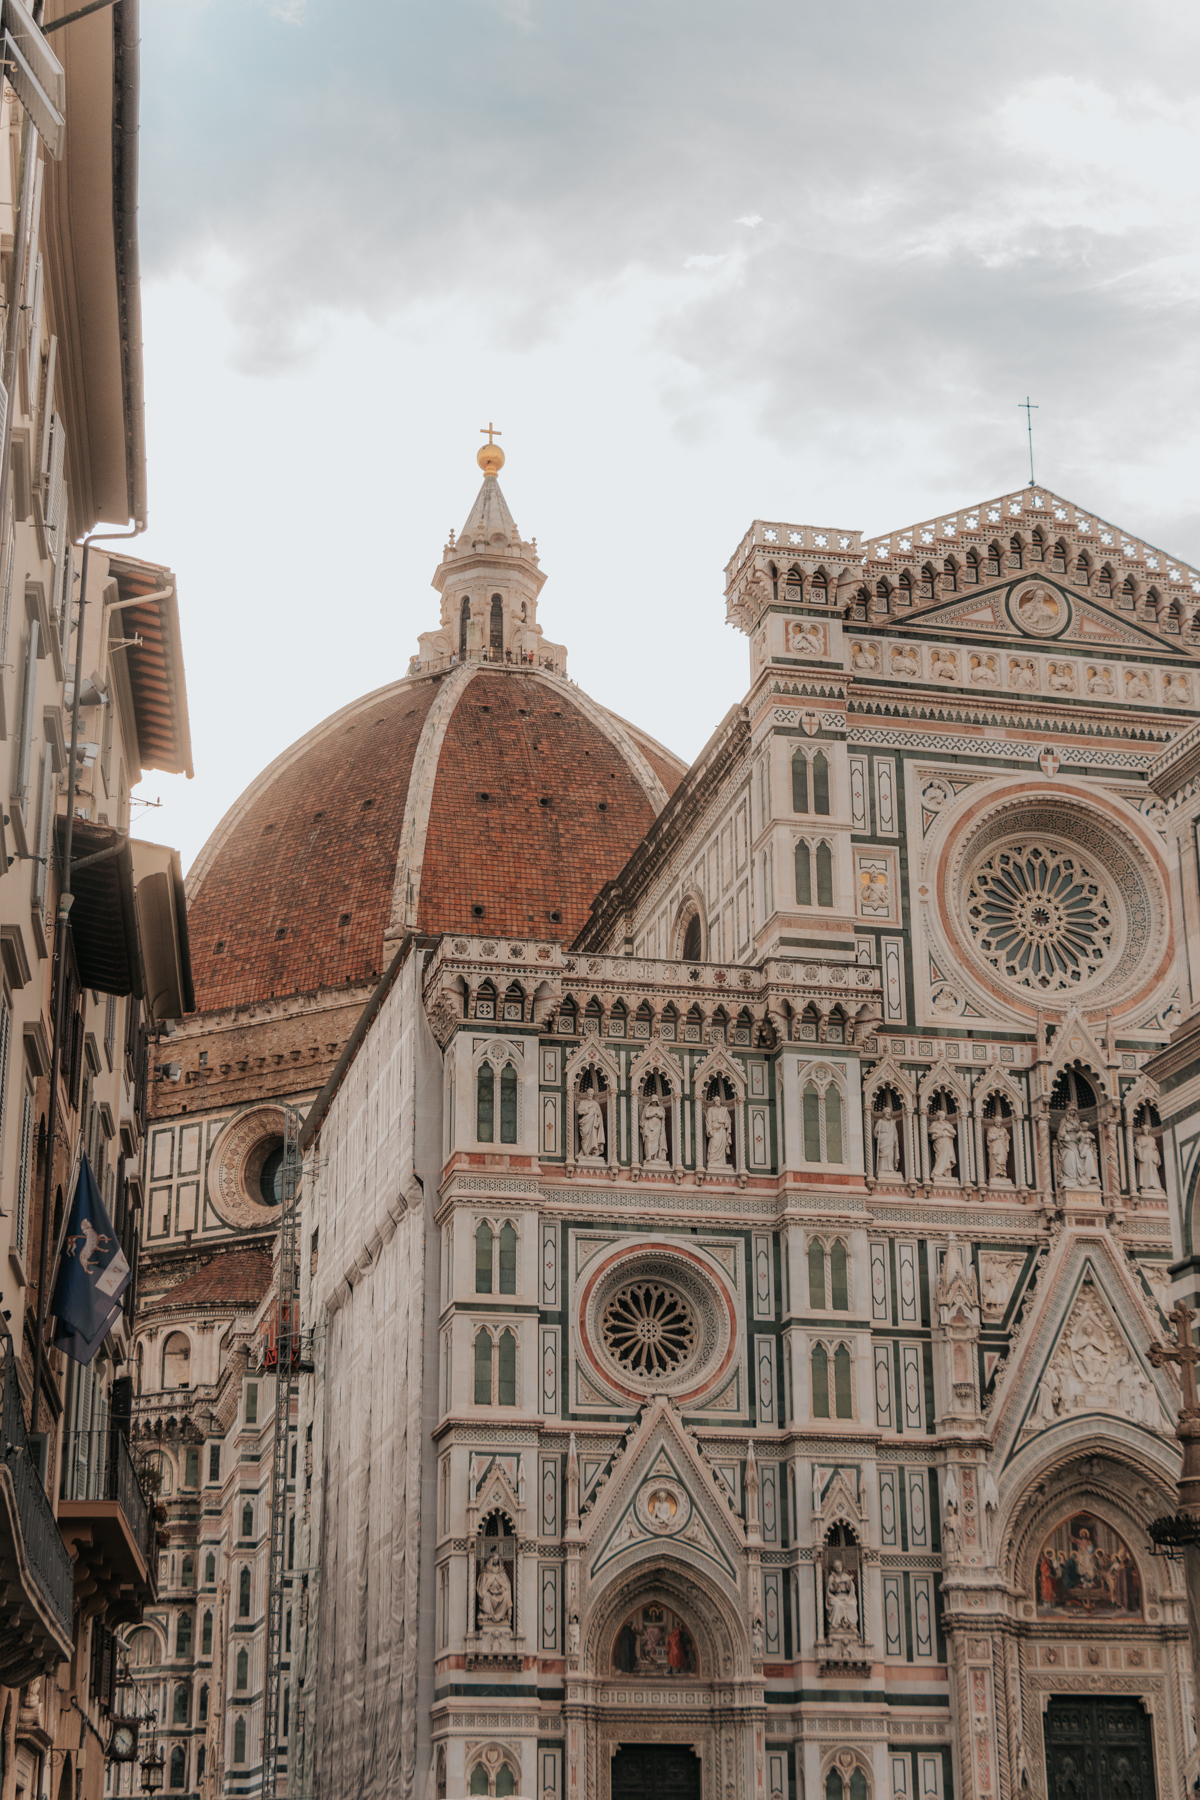 The Best Way to Spend 2 Days in Florence, Italy